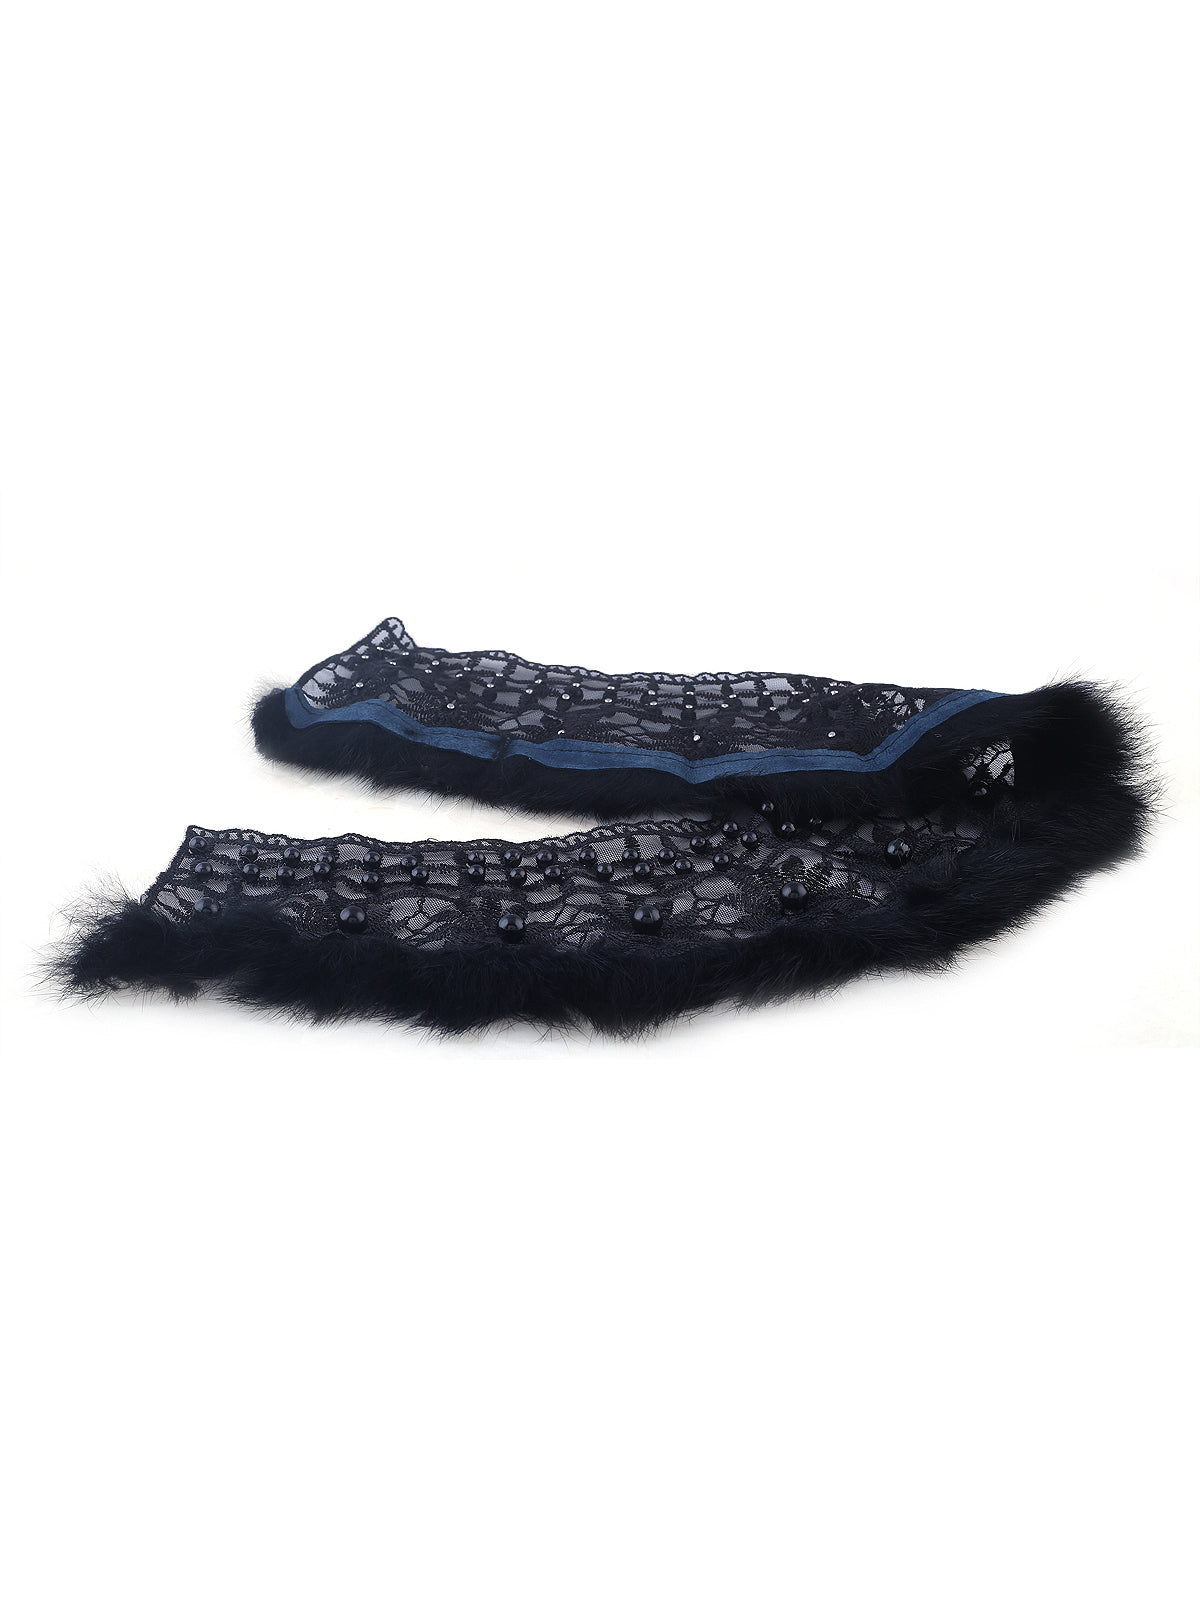 Designer Black Embroidery Beaded Neck with Faux Fur Edge